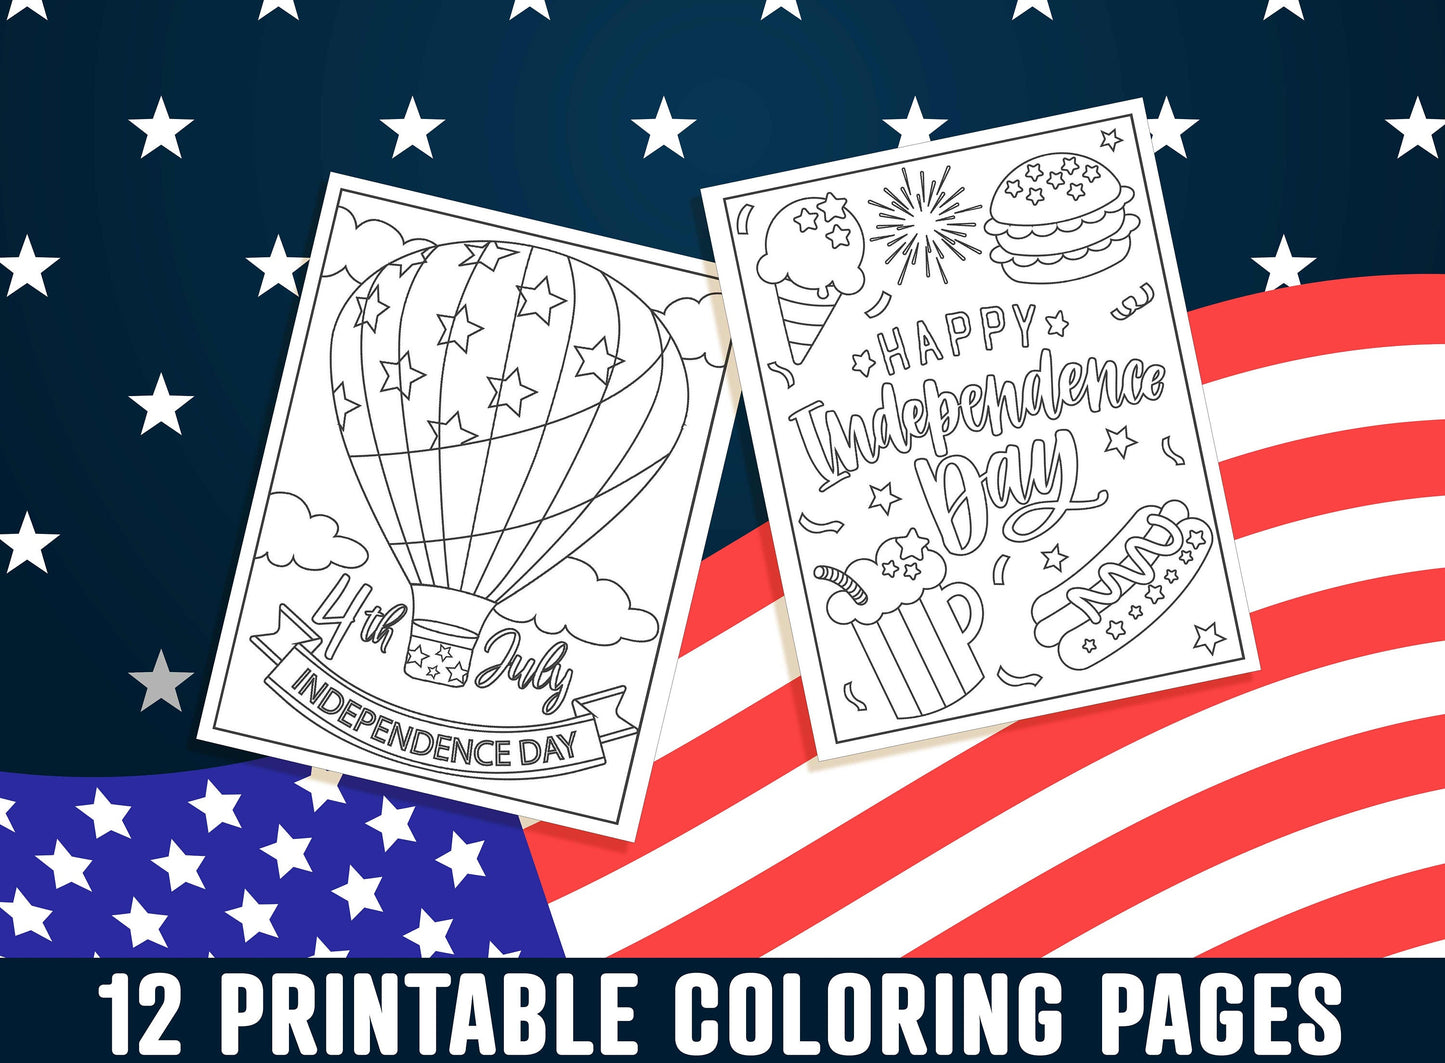 Fourth of July Coloring Pages, 4th of July Coloring Book for Kids, Boys, Girls, Teens, Adults, Independence Day/Printable Activity Sheets